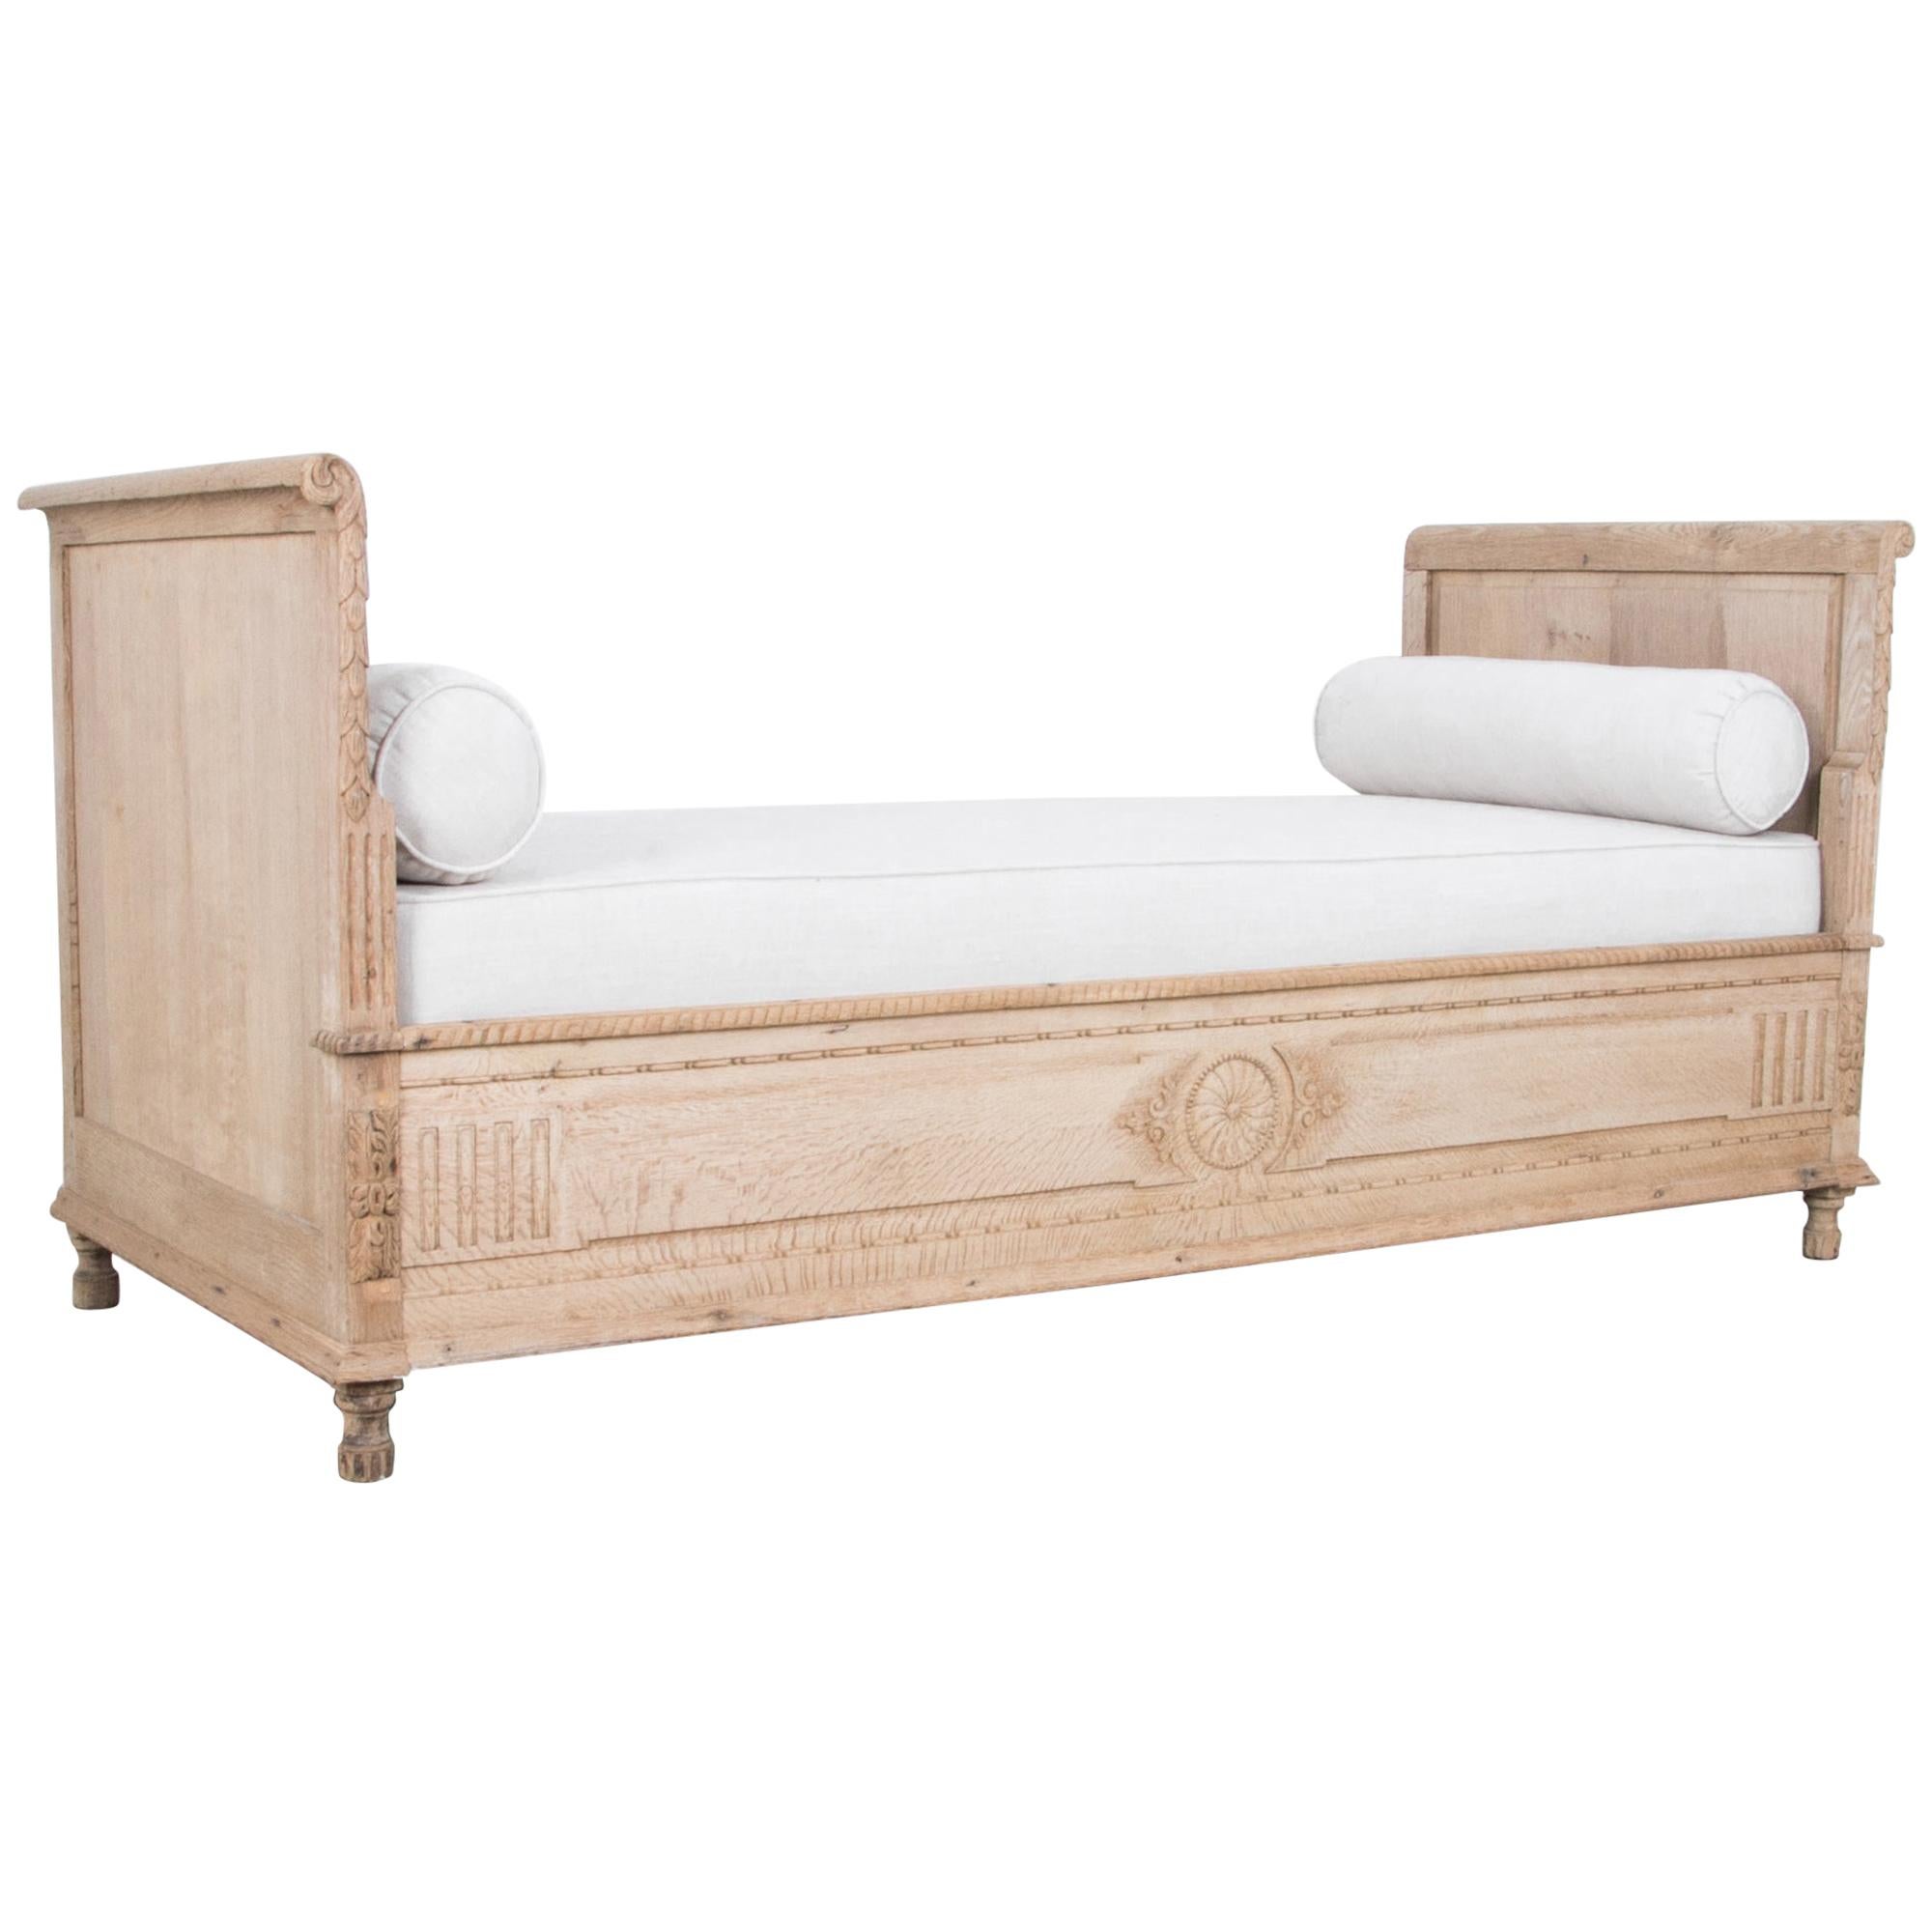 Late 19th Century French Oak Day Bed